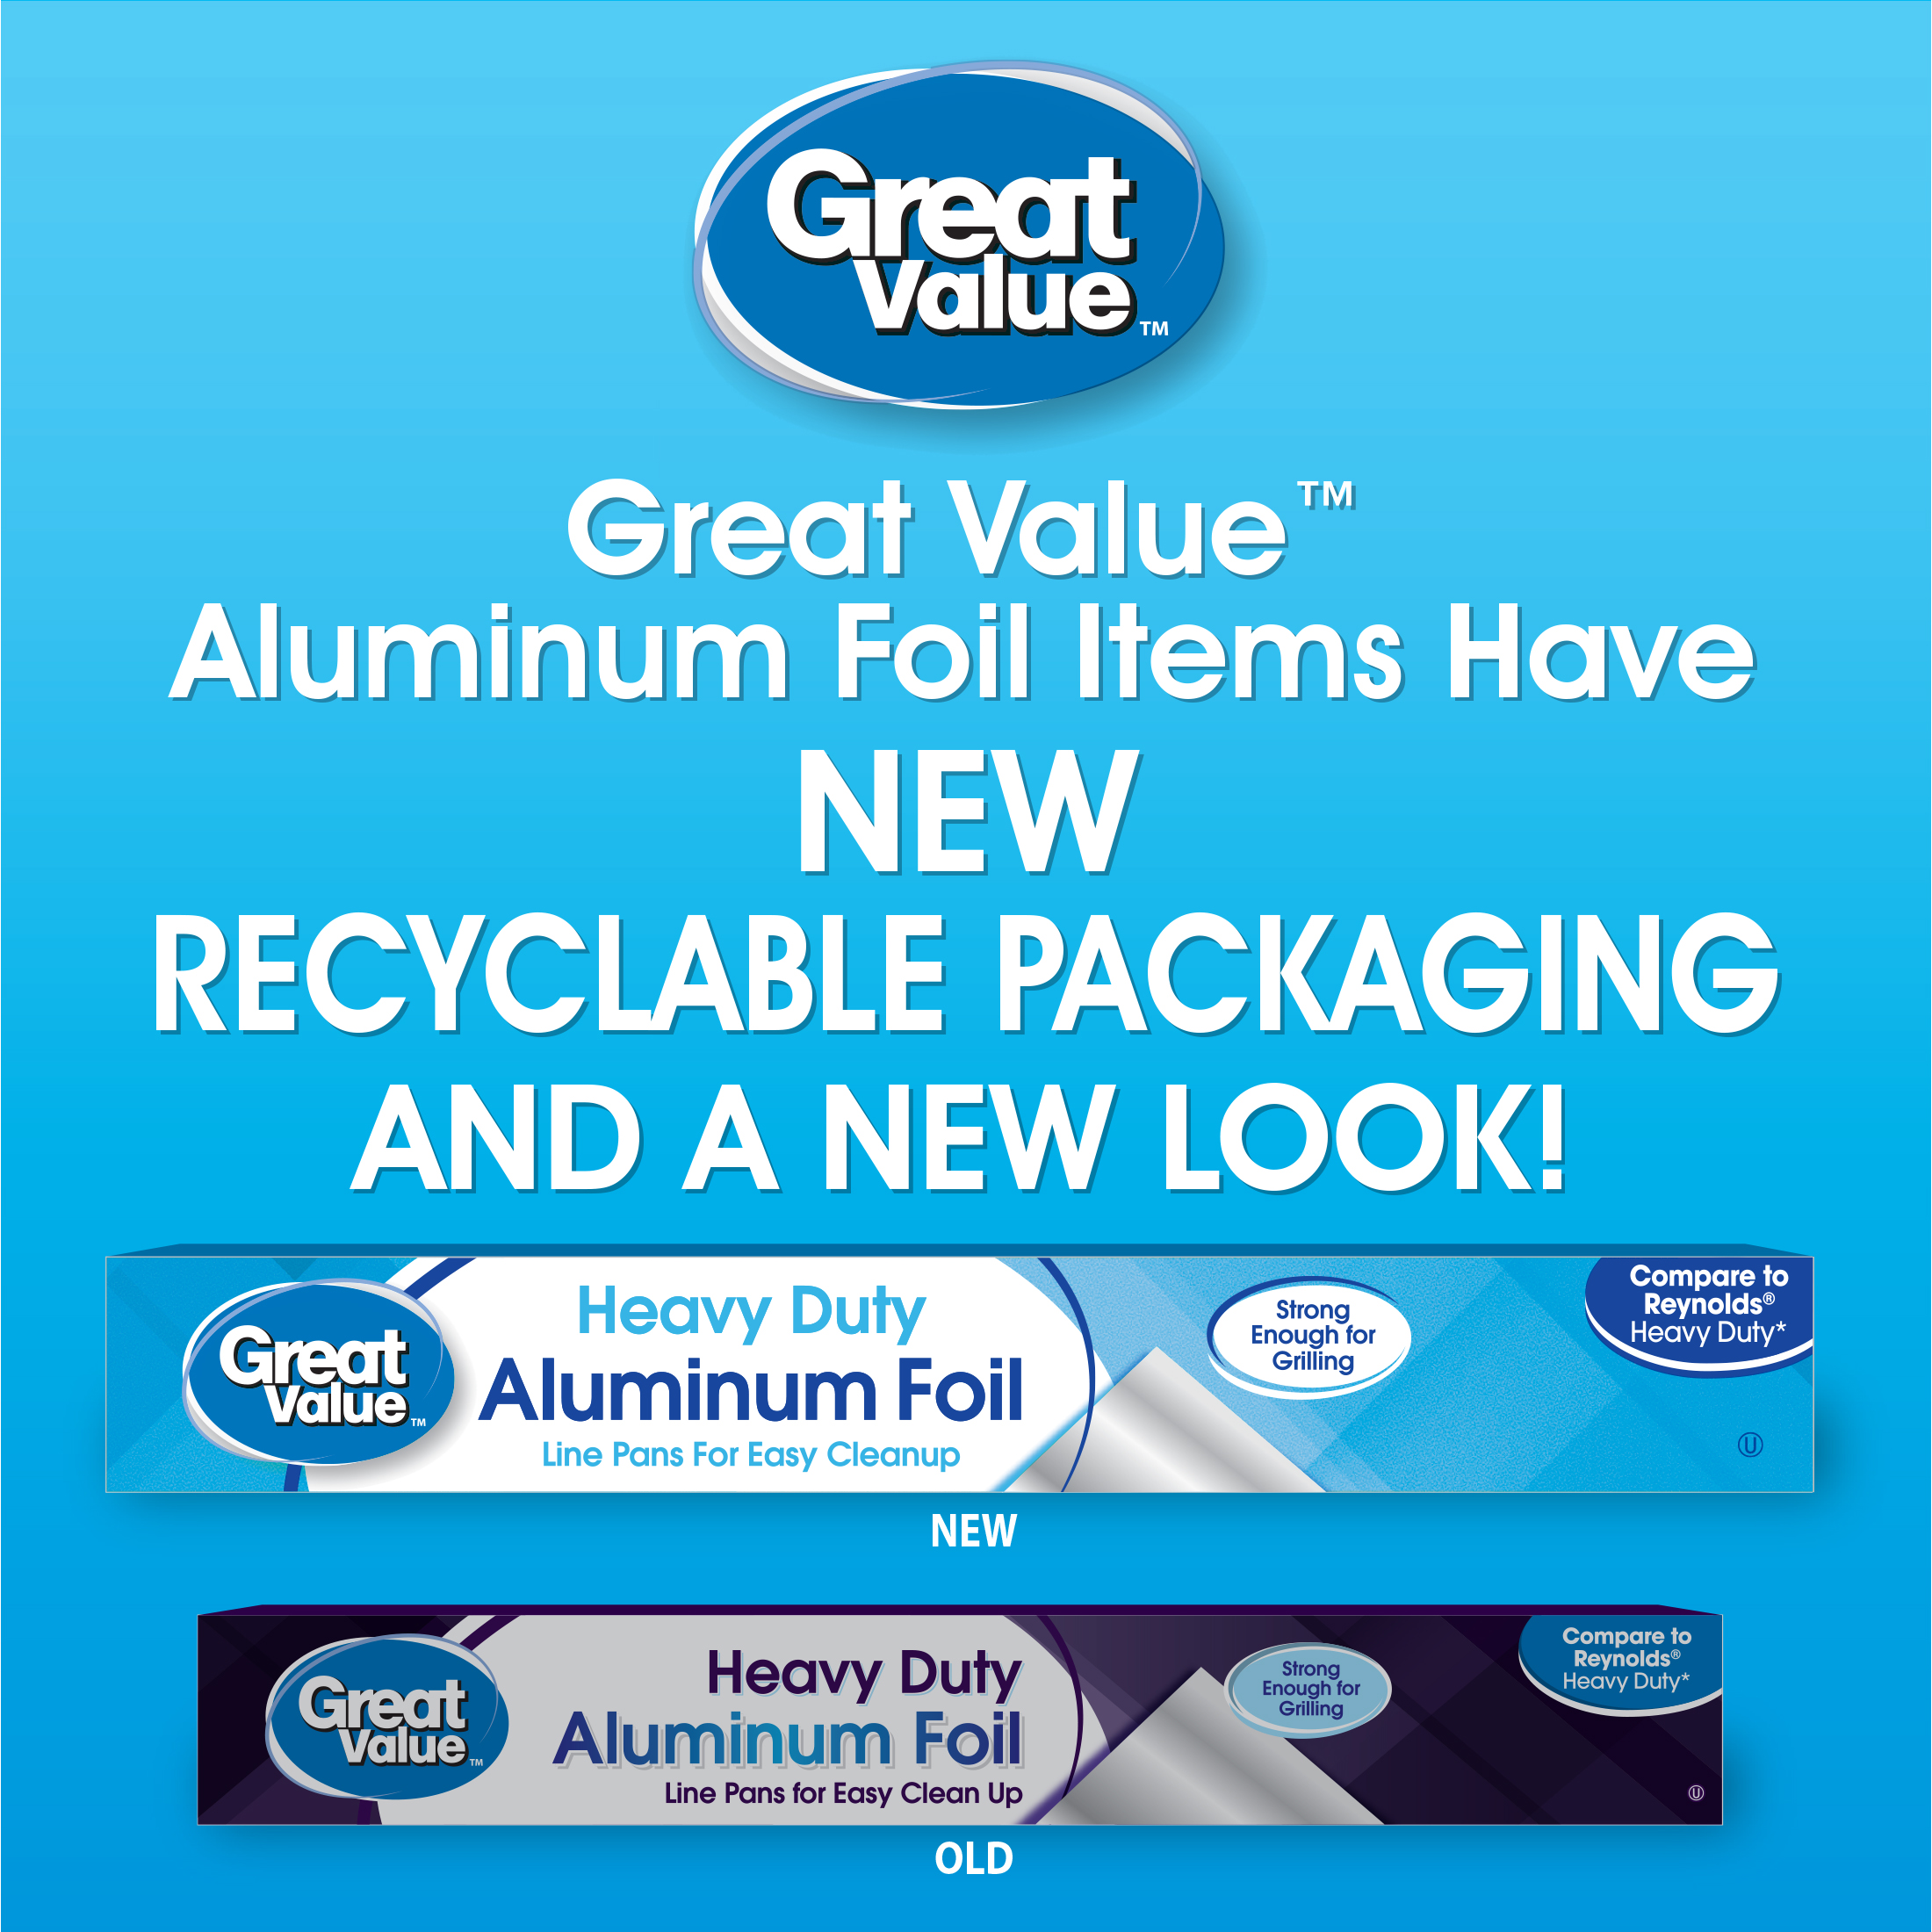 Great Value Heavy Duty Aluminum Foil, 50 sq ft - image 2 of 7